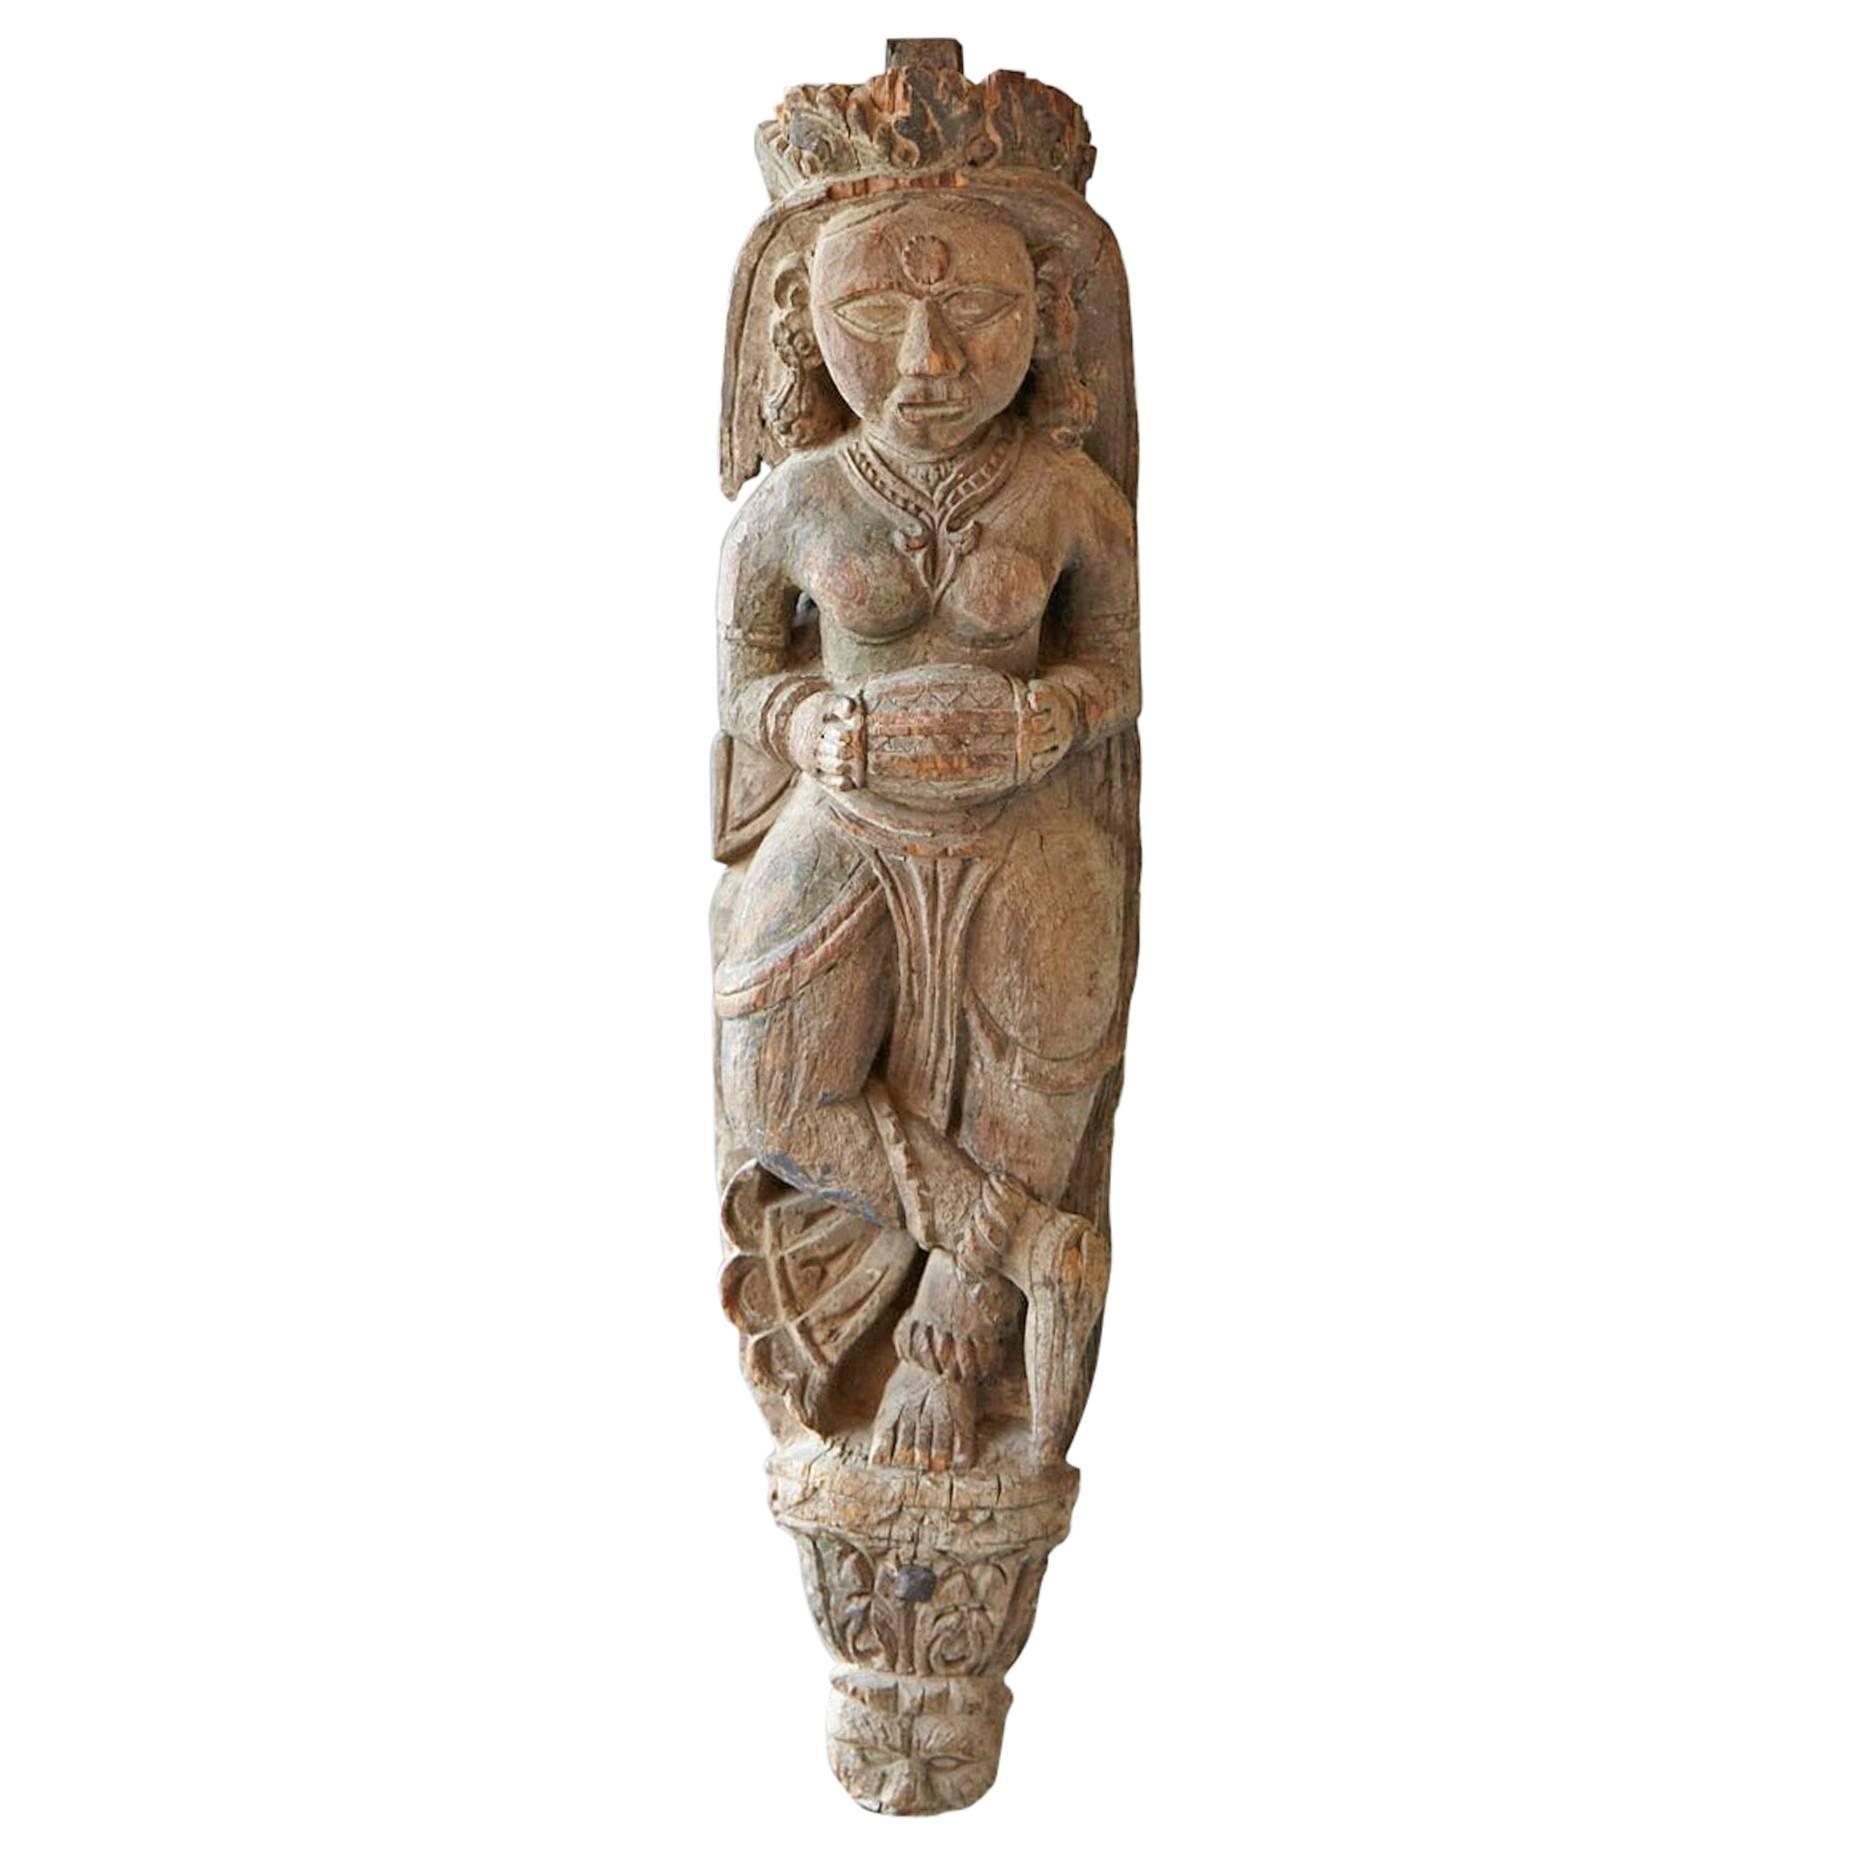 Hand-Carved Wood Wall Sculpture of an Indian Goddess